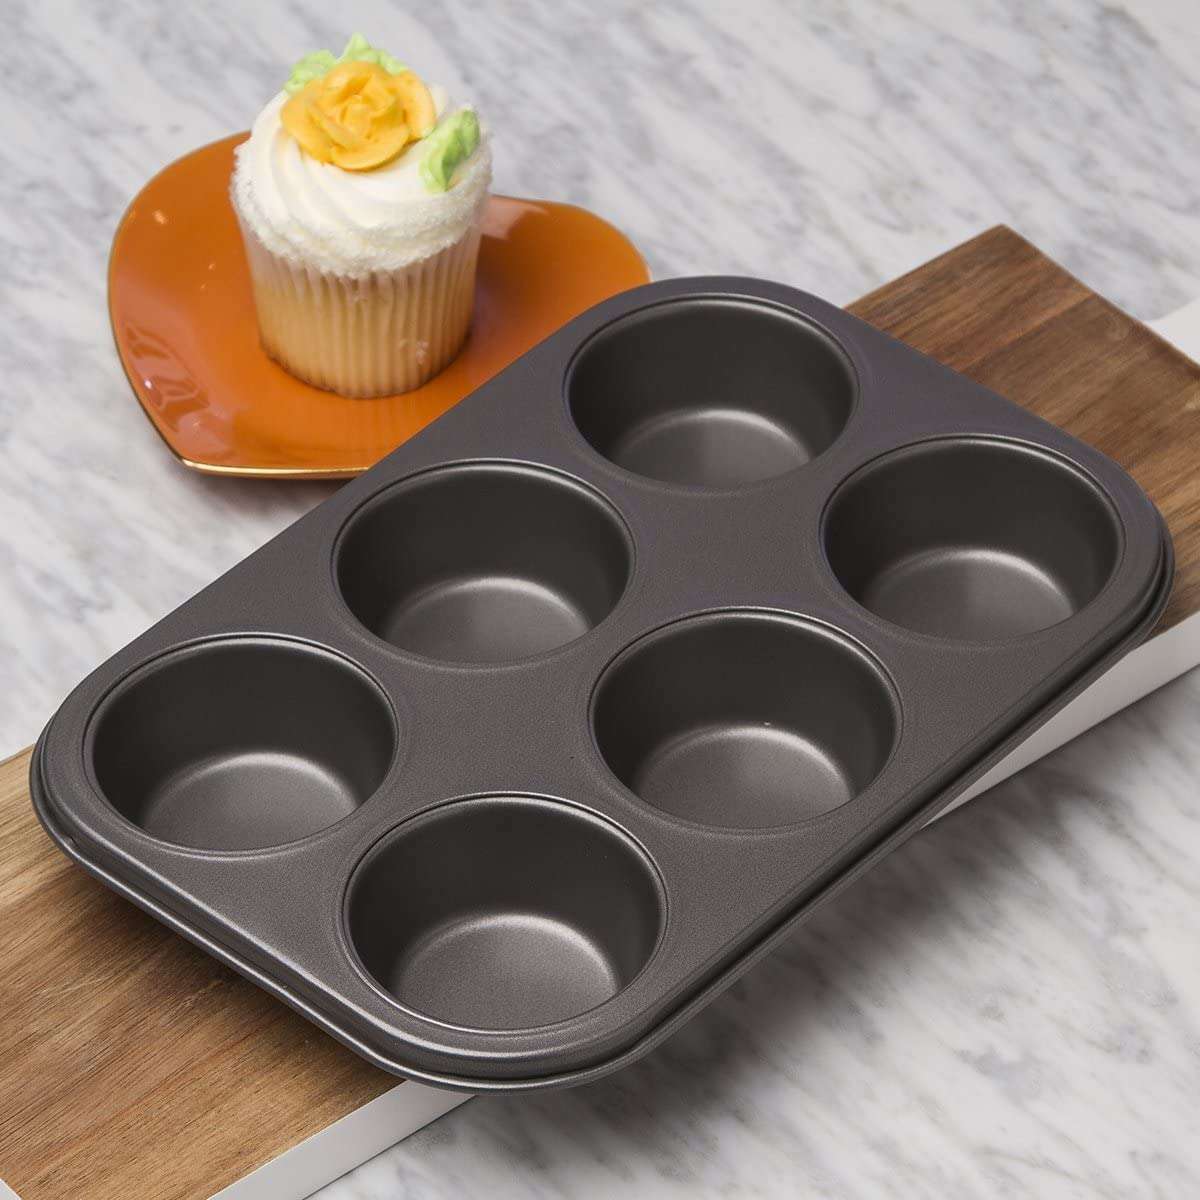 Ecolution Bakeins 24 Mini Muffin and Cupcake Pan